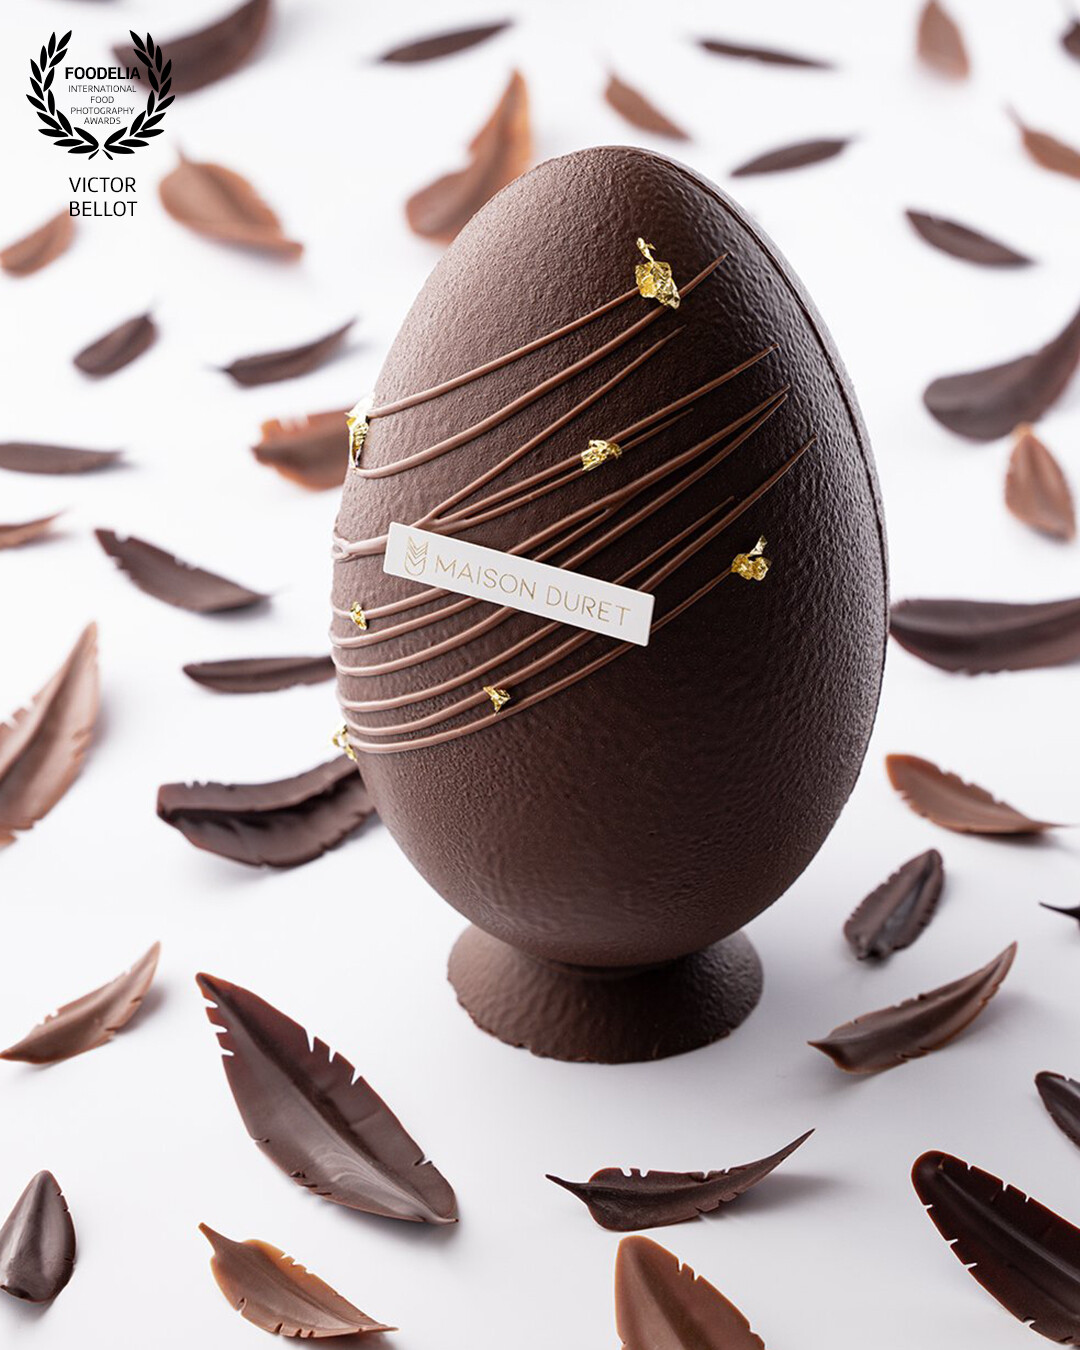 The dark chocolate Easter egg from Maison Duret staged with dark chocolate and dulcey nibs.